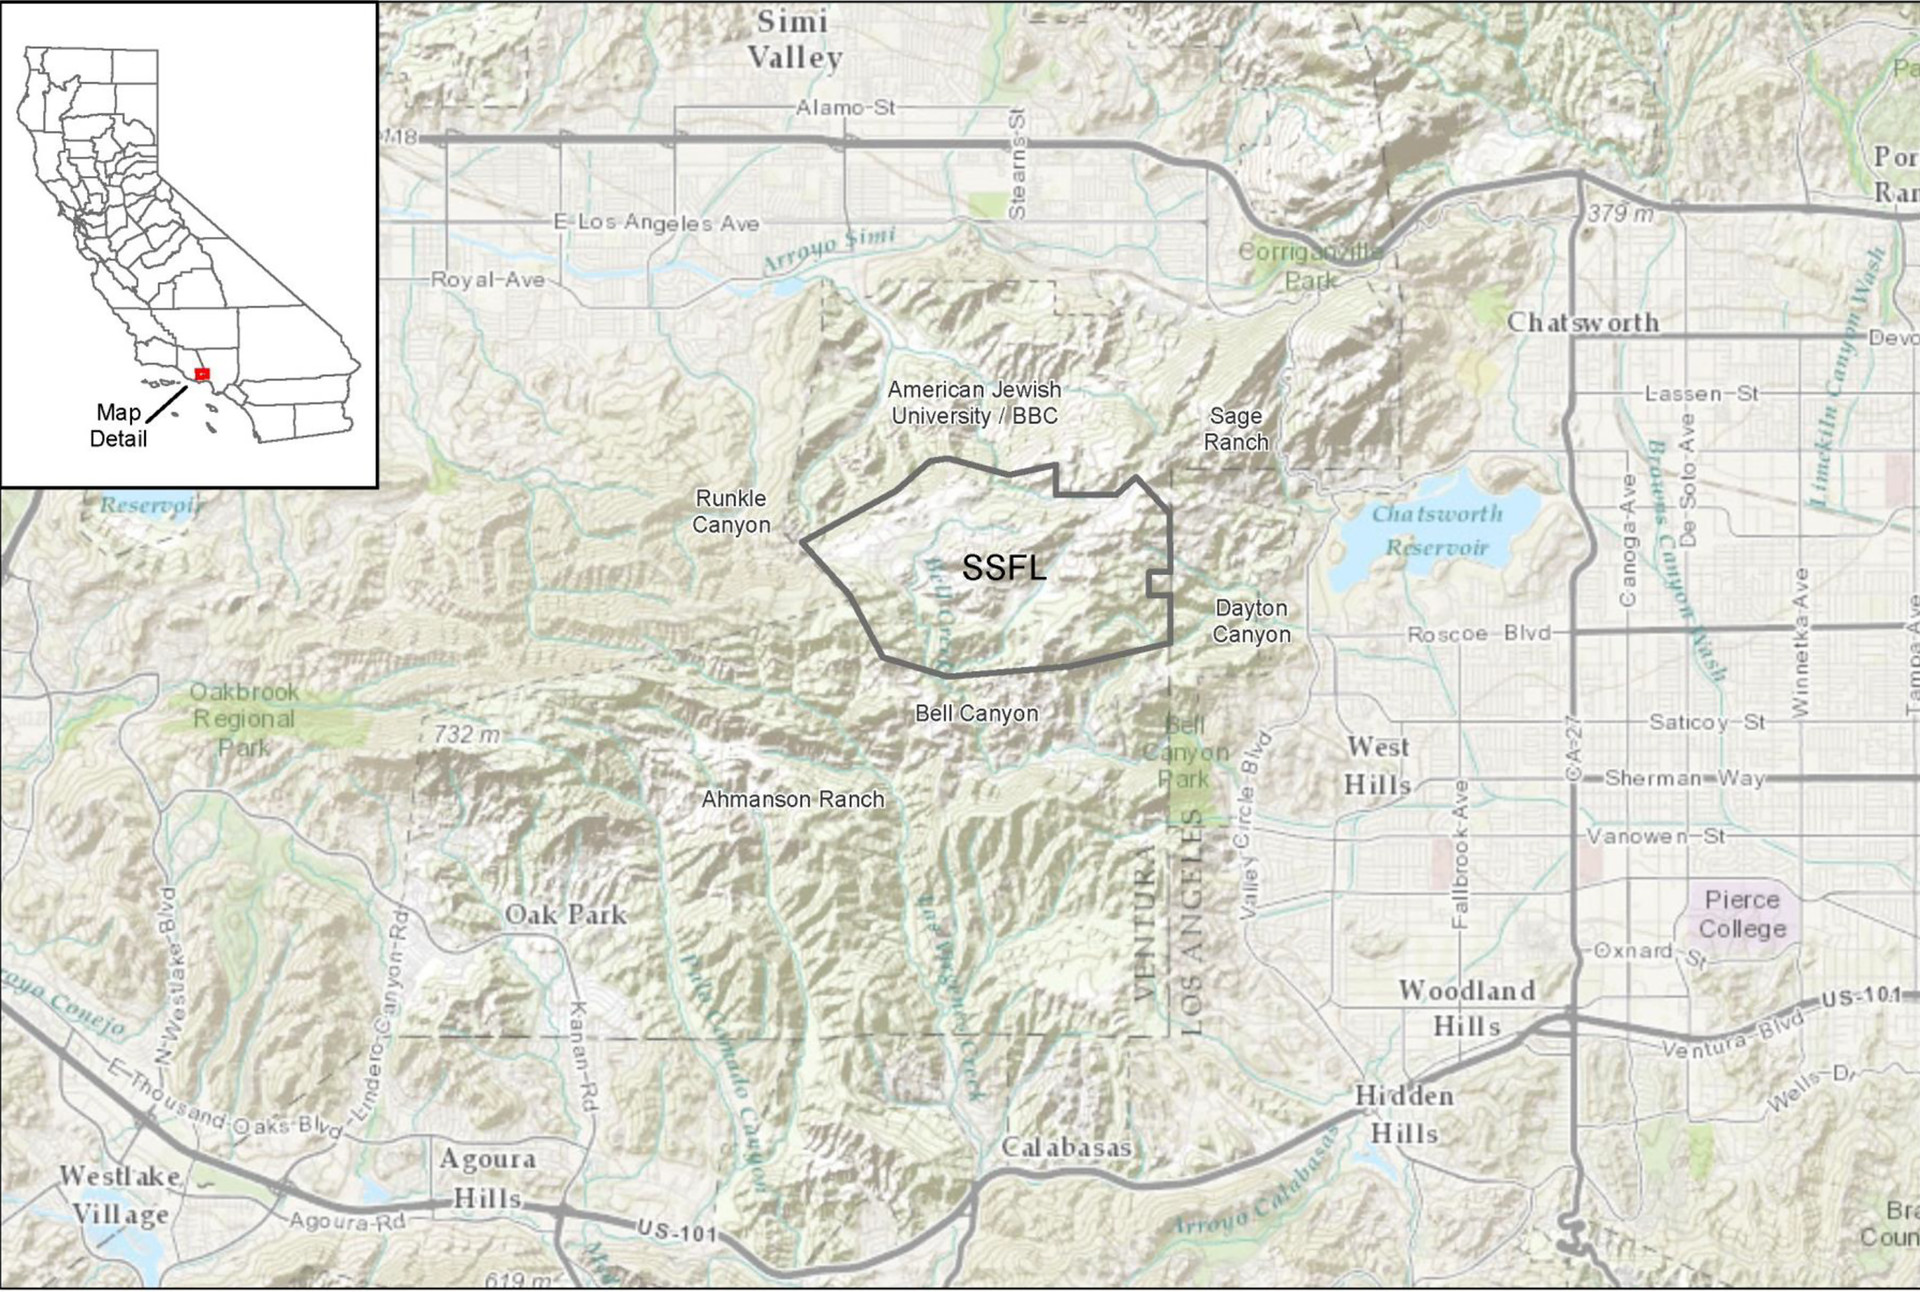 The Santa Susana Field Laboratory is in the Simi Hills about 30 miles west of downtown Los Angeles.